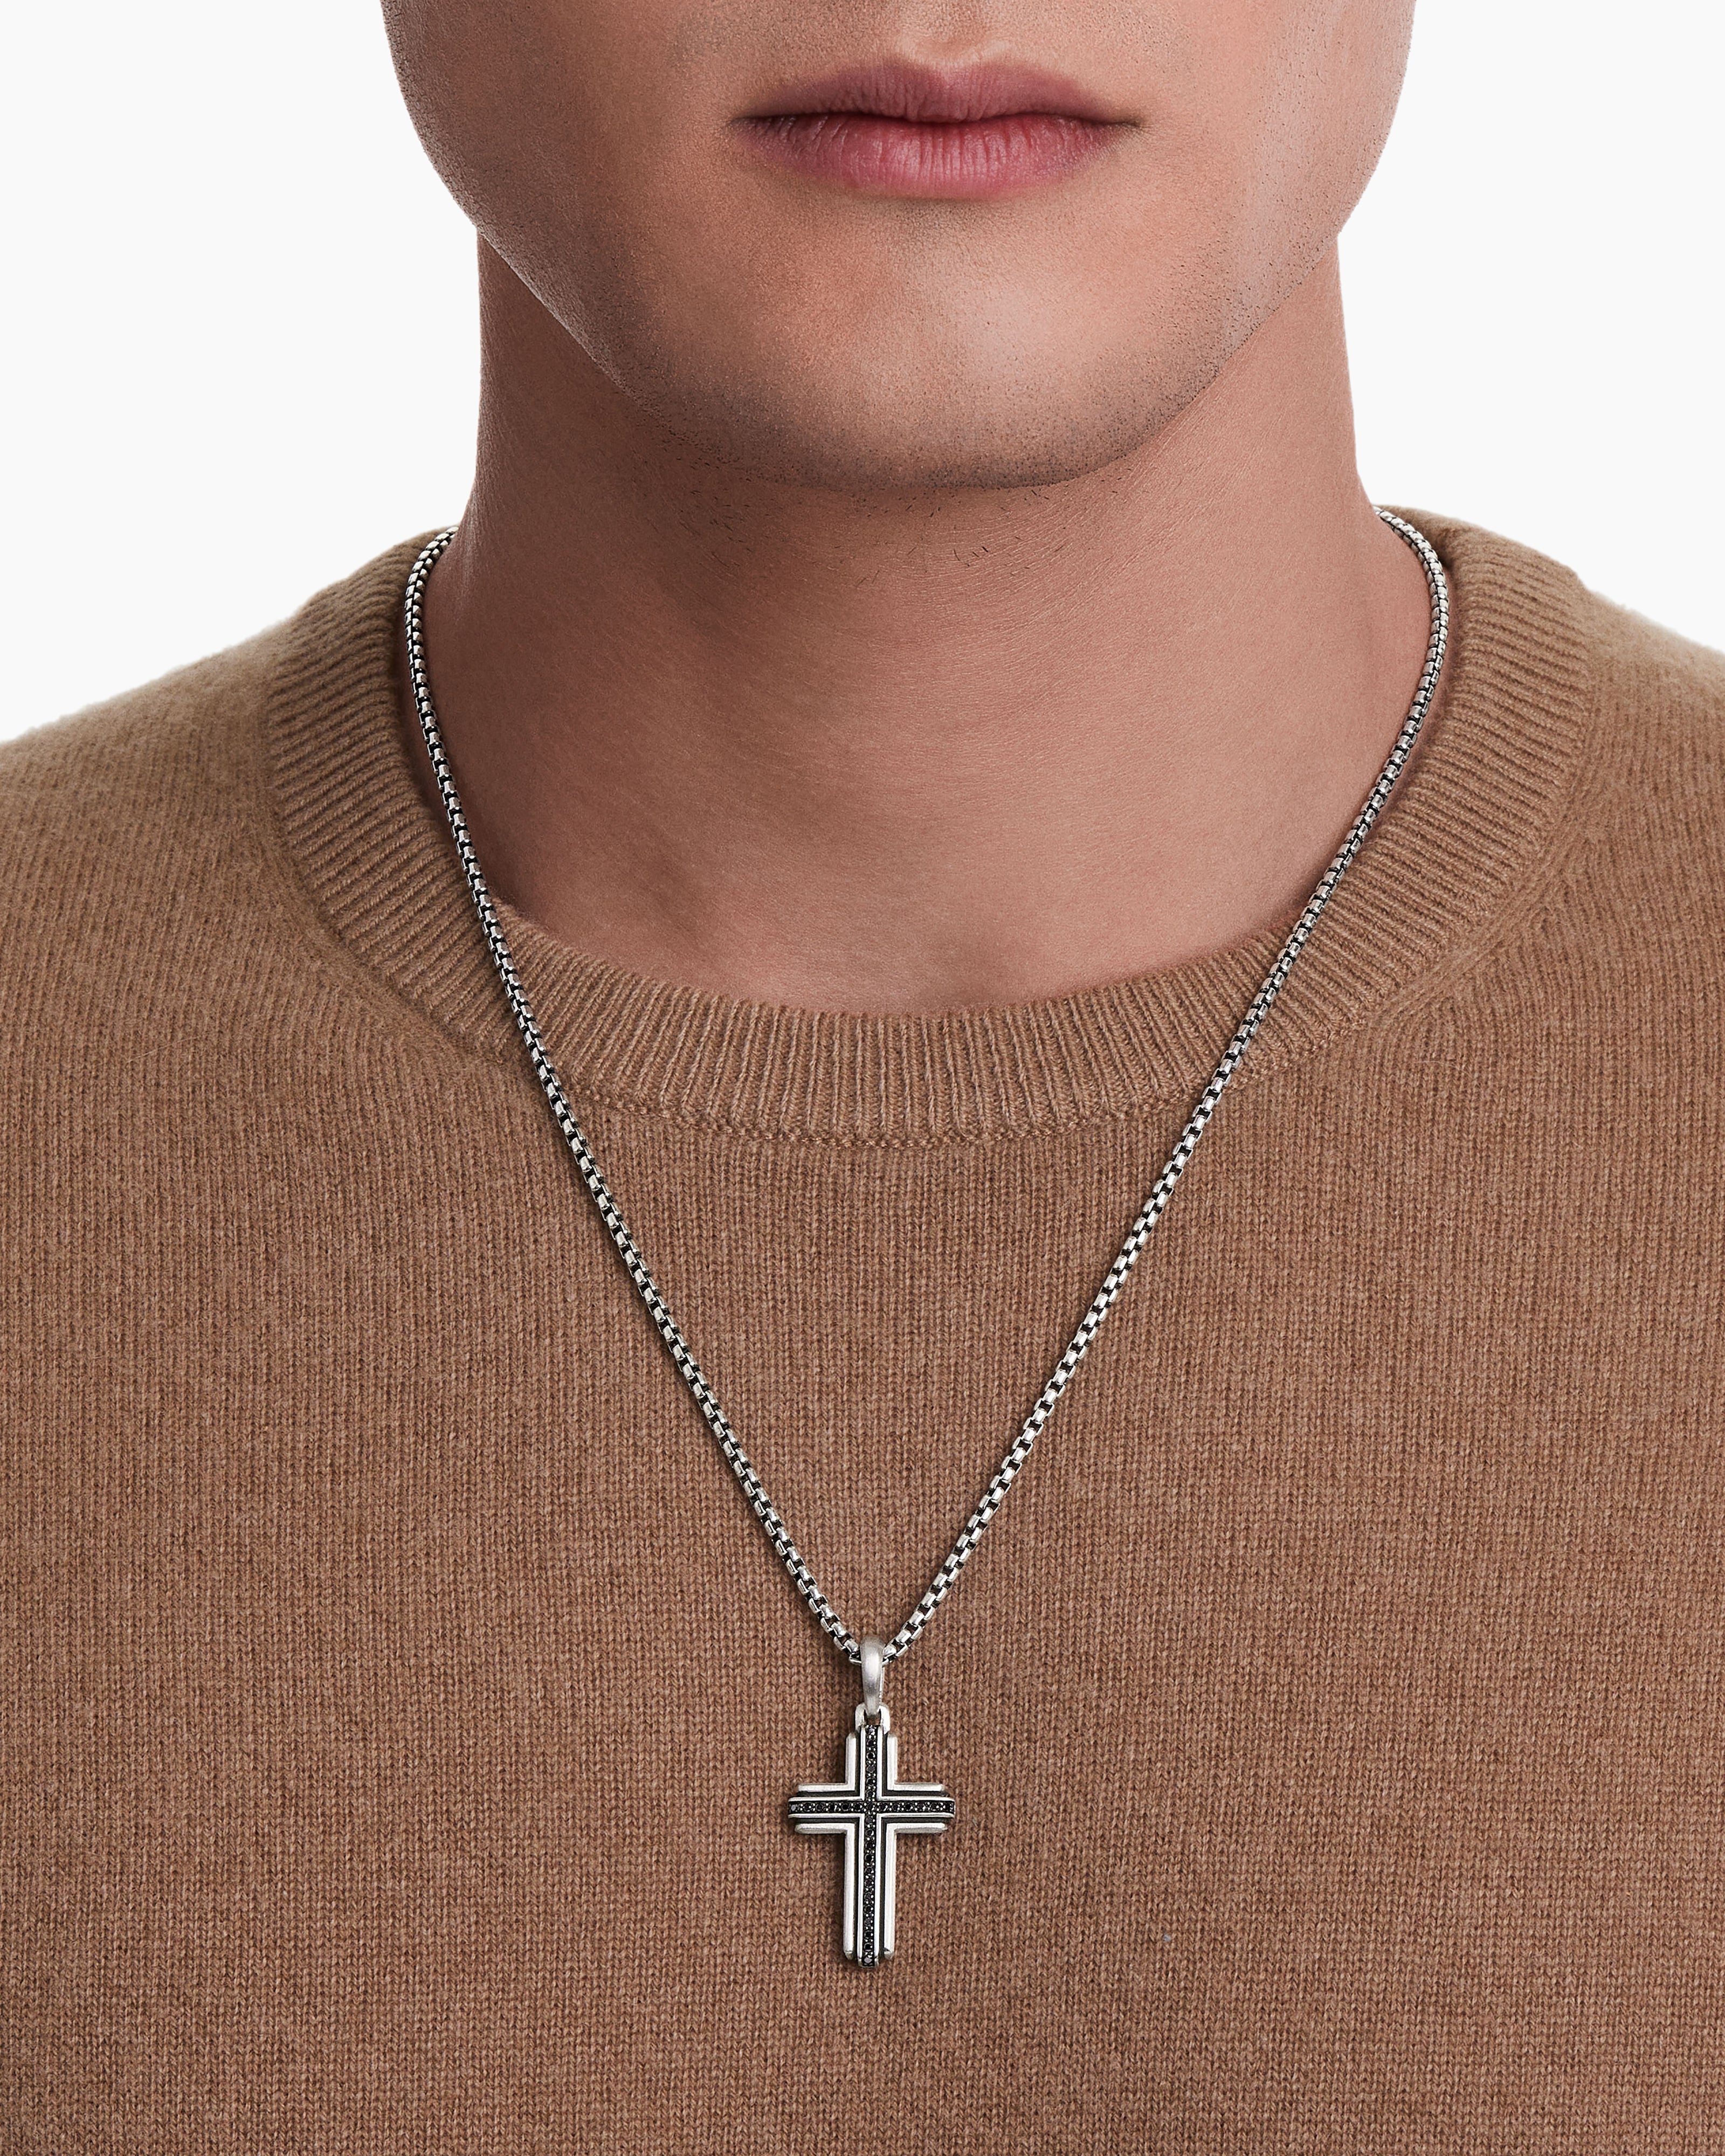 X Cross Necklace in Sterling Silver with 14K Yellow Gold and Diamonds,  31.7mm | David Yurman